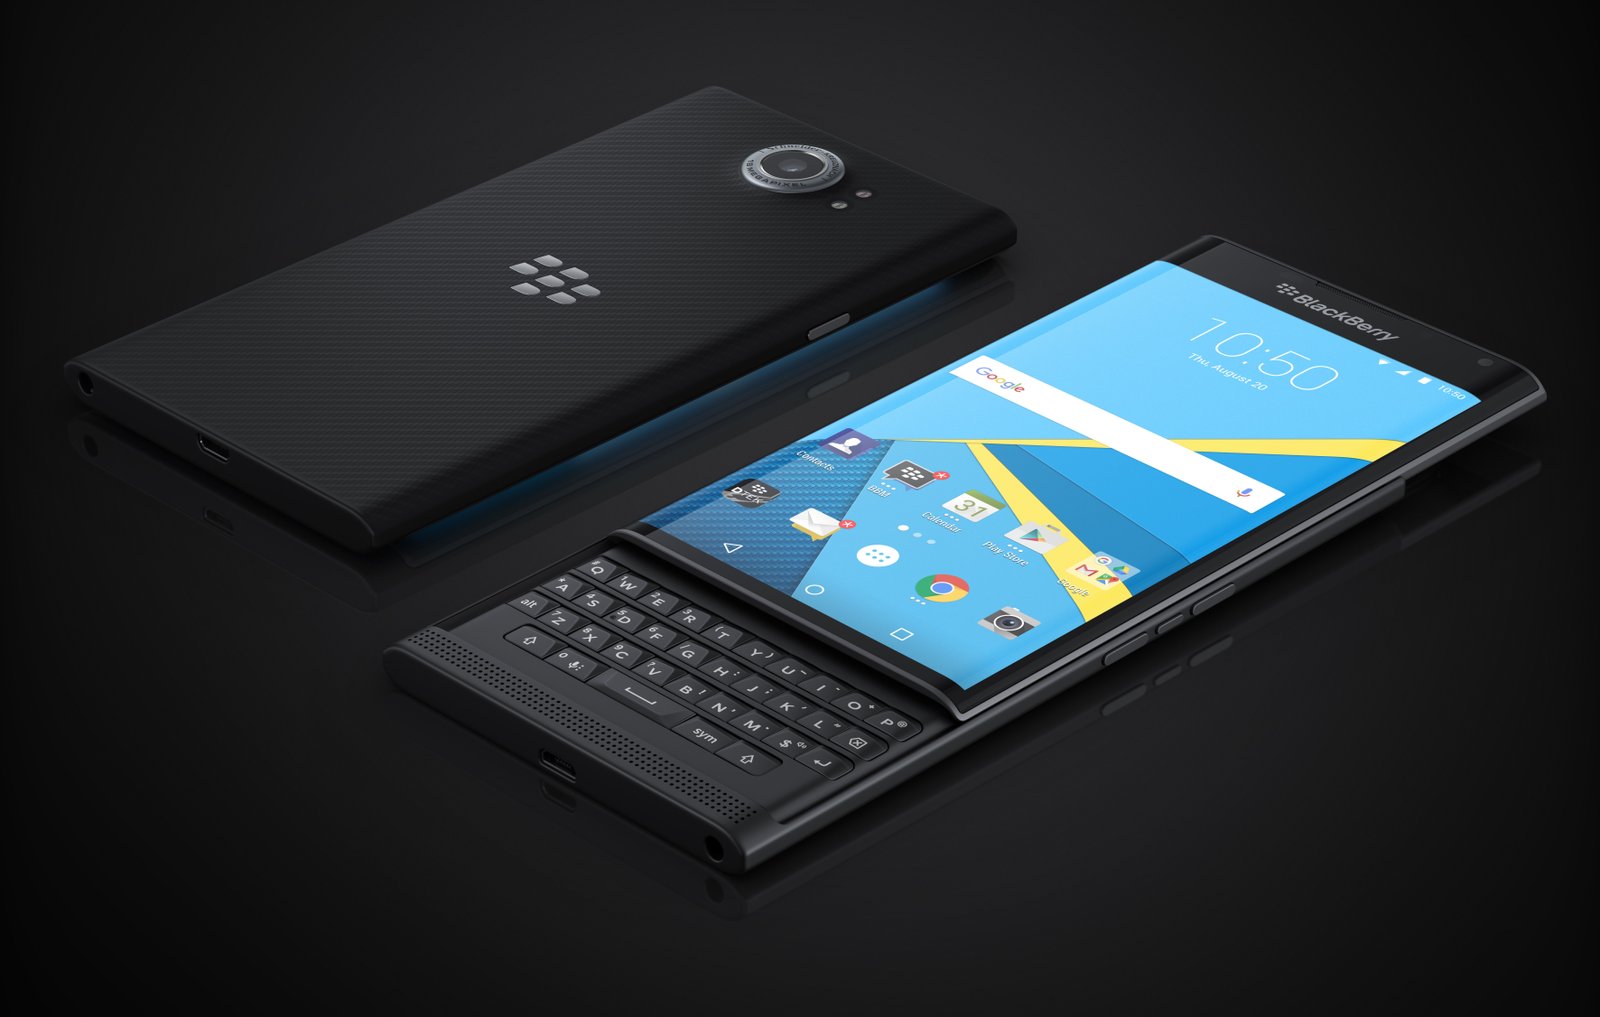 BlackBerry Android smartphone specs, release date Neon Rome spotted online